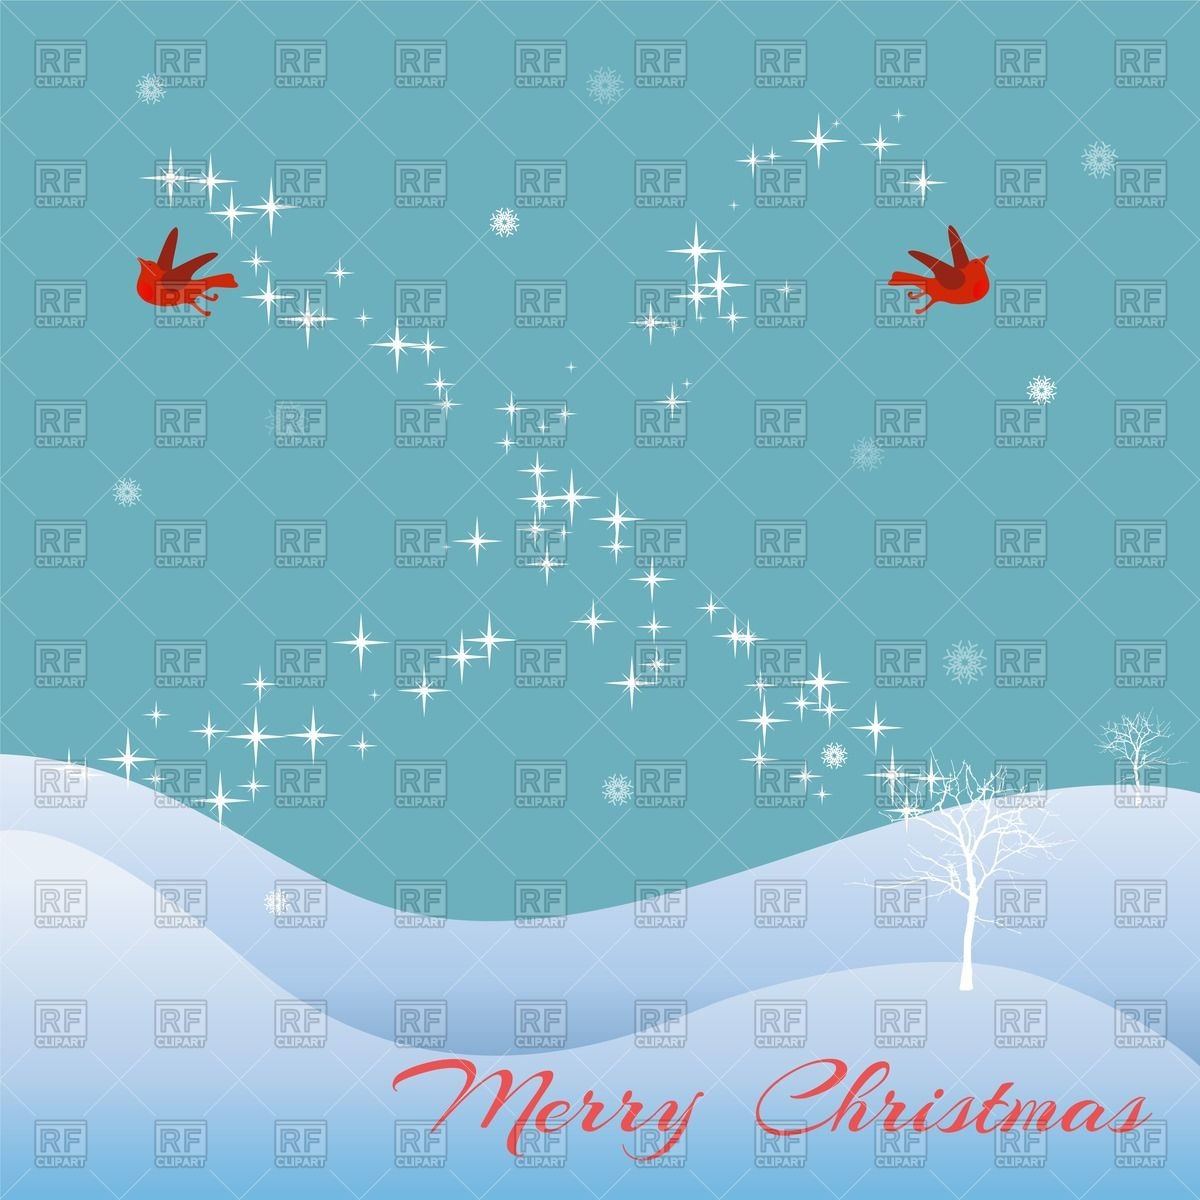 Merry Christmas Card With Winter Landscape With Snowdrifts And Birds